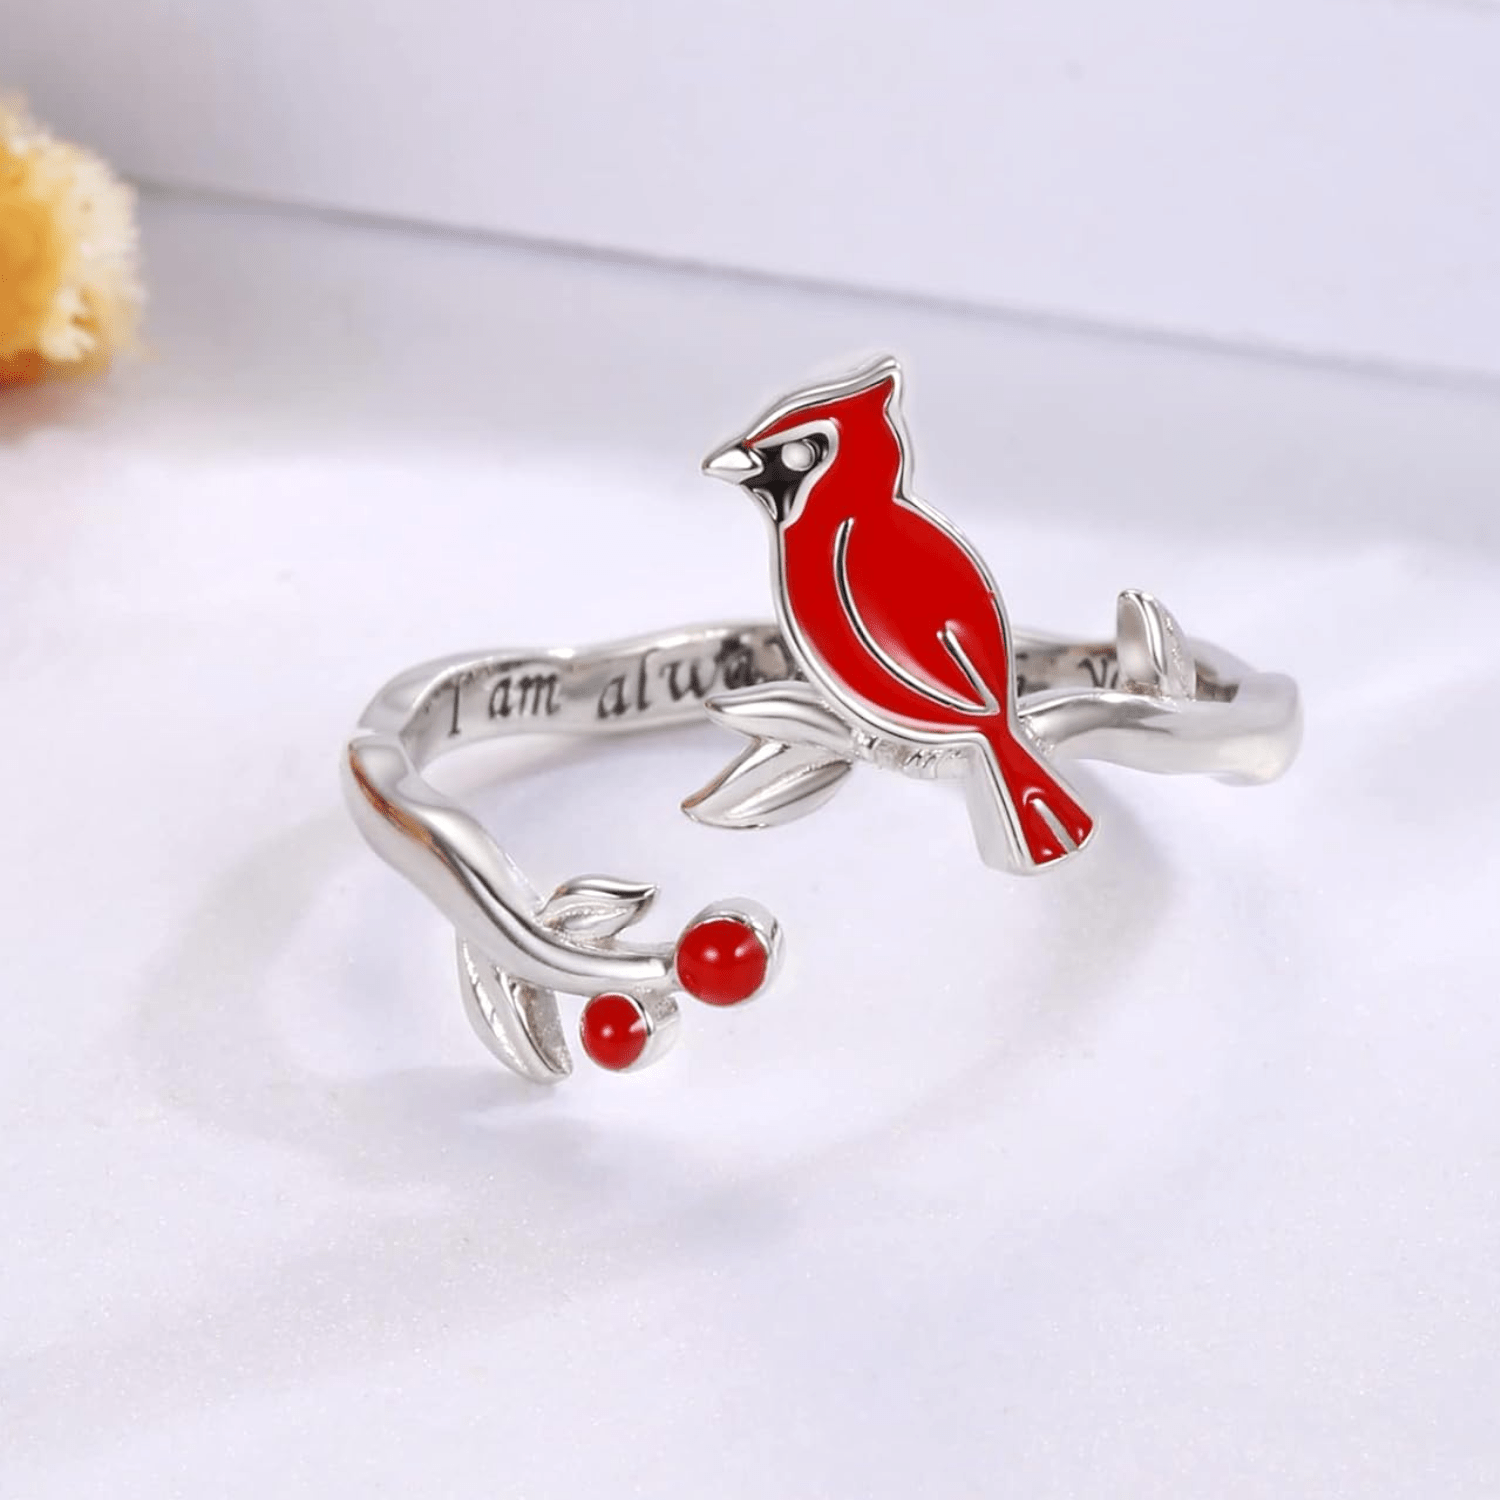 Christmas Cardinal Gift for Mom Sterling Silver Cardinal Xmas Necklace 16 / No